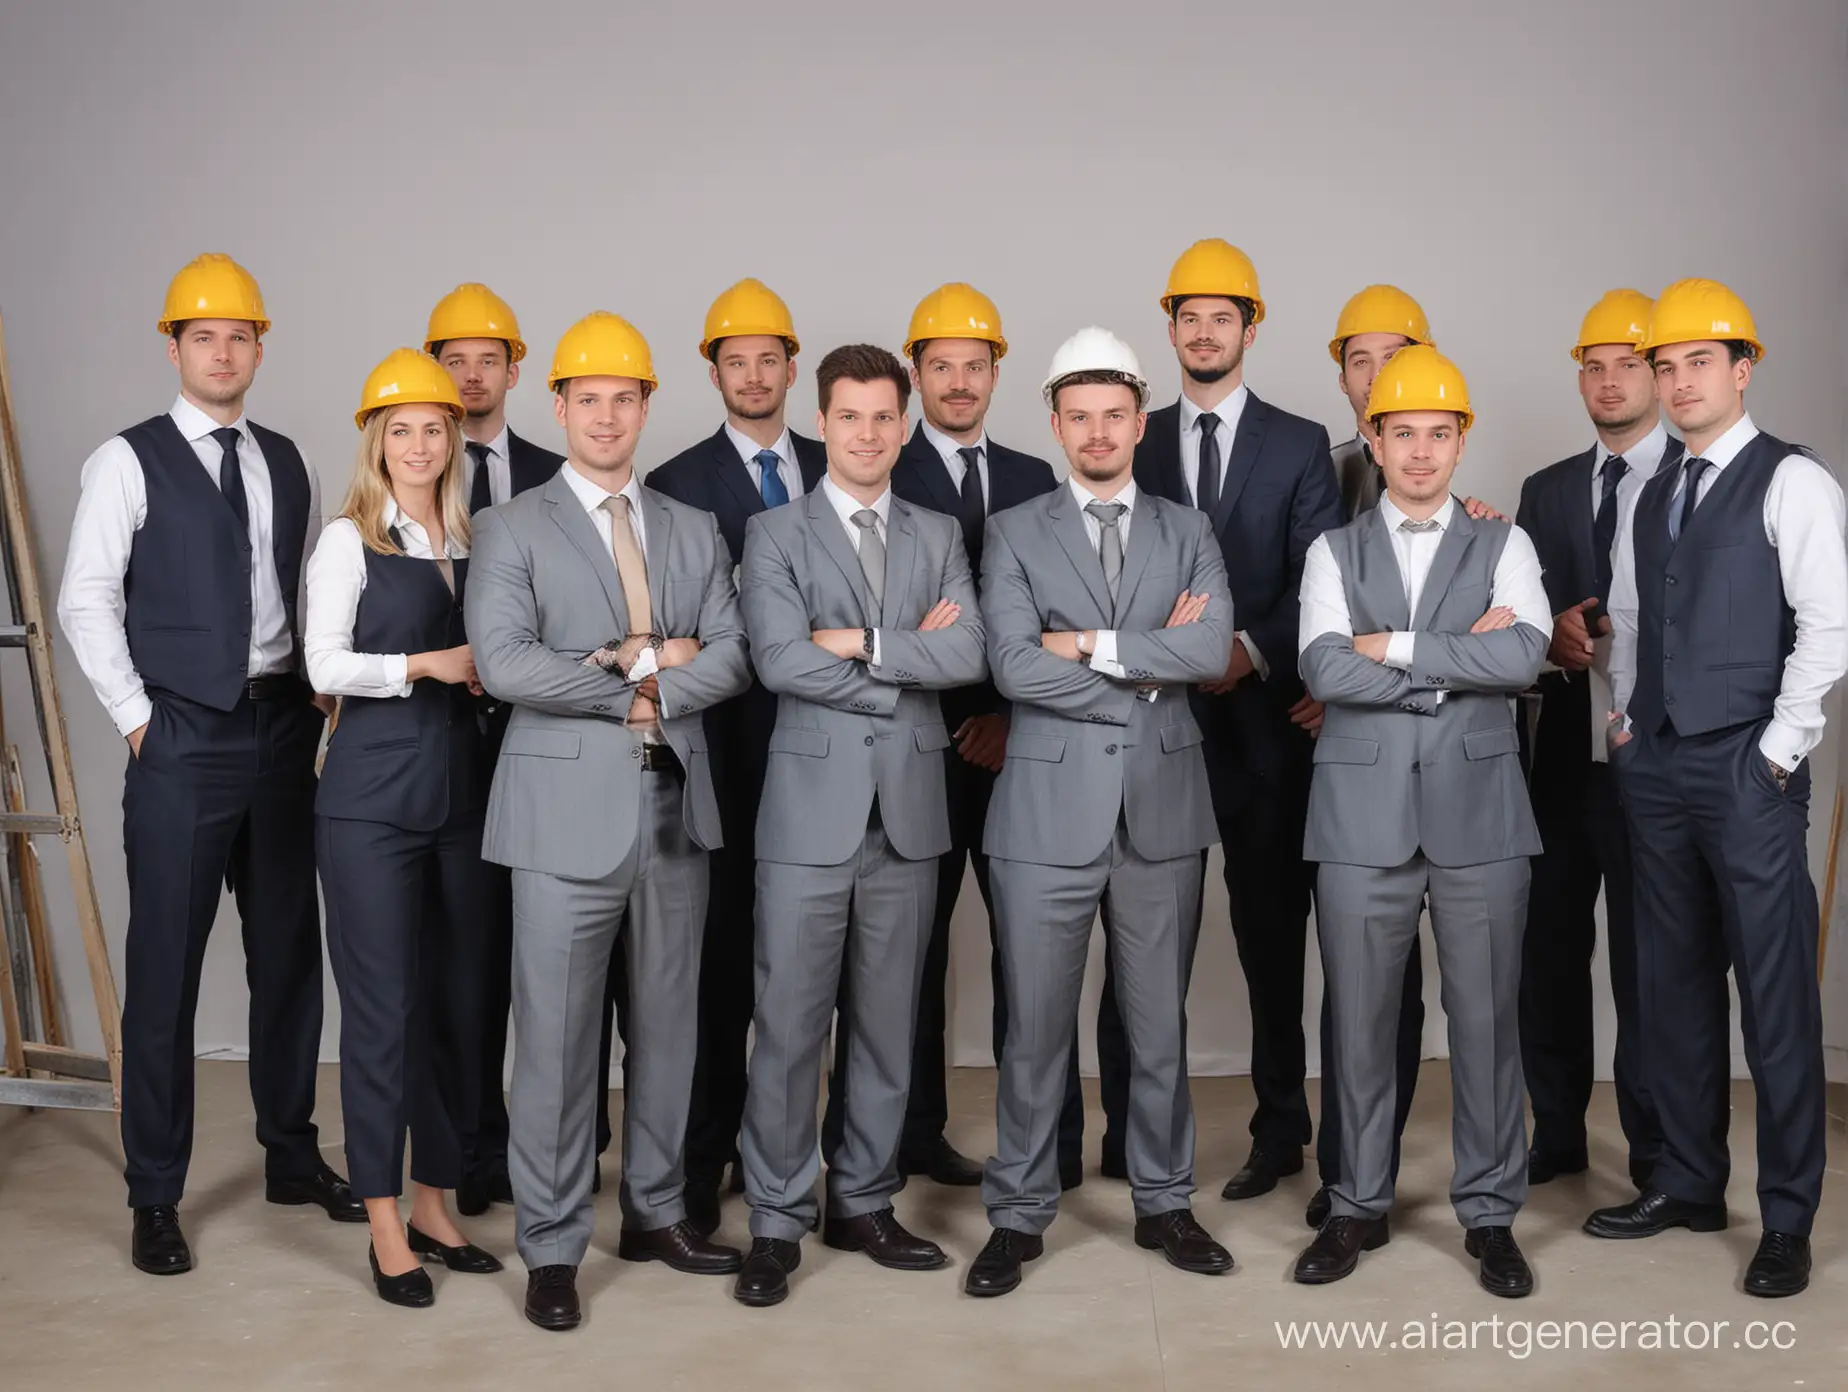 Construction-Company-Employees-Group-Photo-in-Formal-Attire